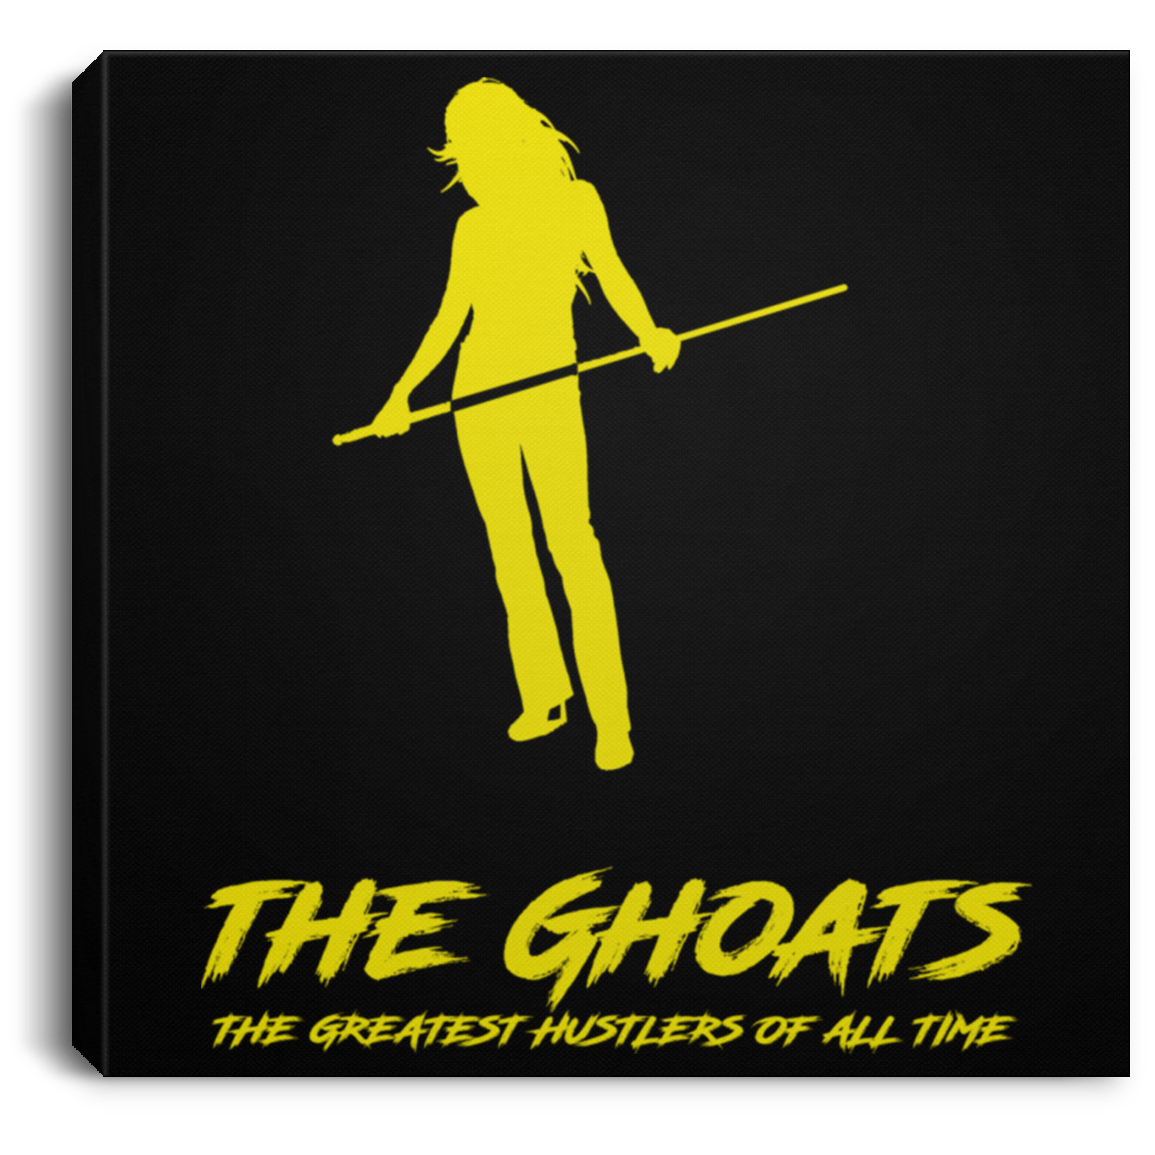 The GHOATS custom design #36. Shark Sighted. Female Pool Shark. Shoot At Your Own Risk. Pool / Billiards. Square Canvas .75in Frame